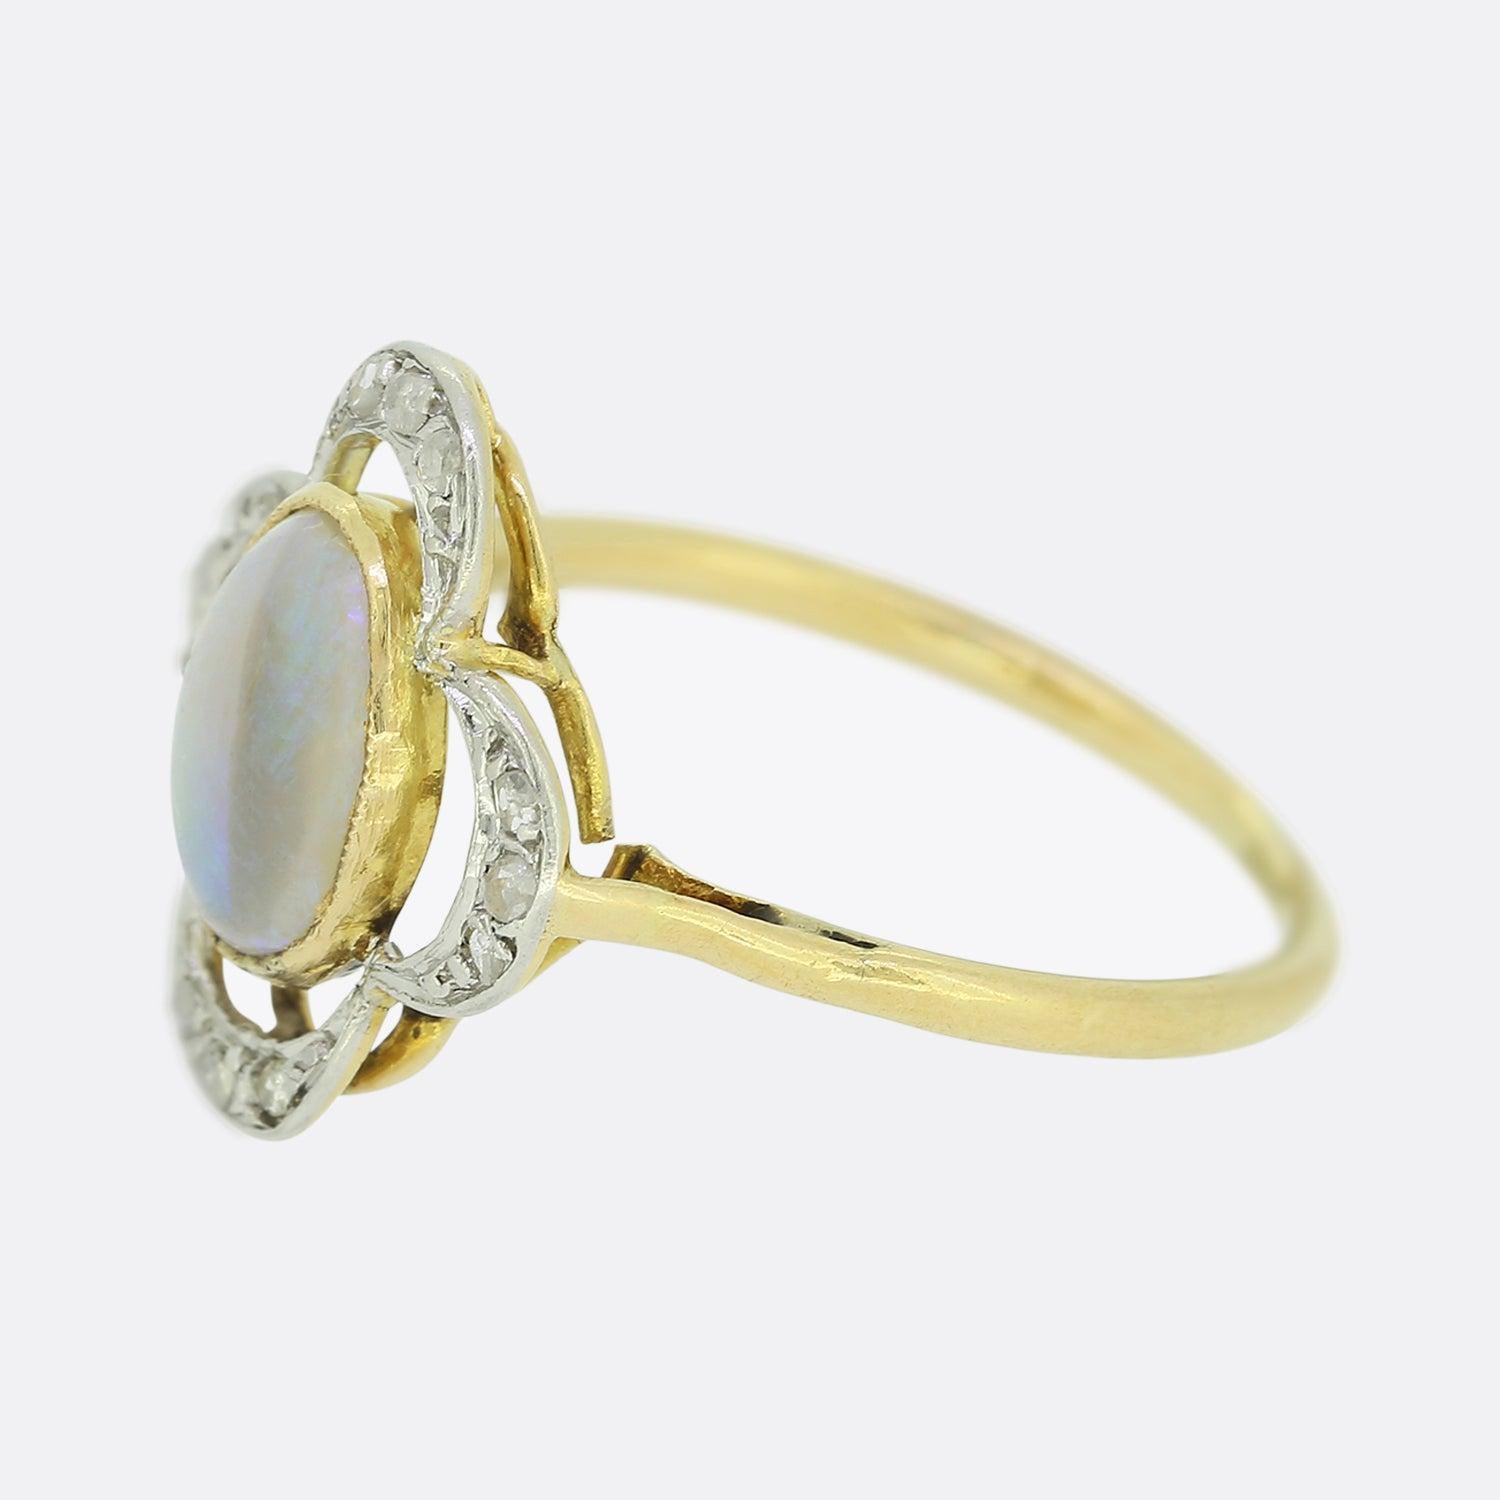 This is an 18ct yellow gold antique opal and diamond ring. The central opal features a lovely play of colour and is surrounded by a border of rose cut diamonds, set in an elegant floral design. The ring features French assay marks and dates back to